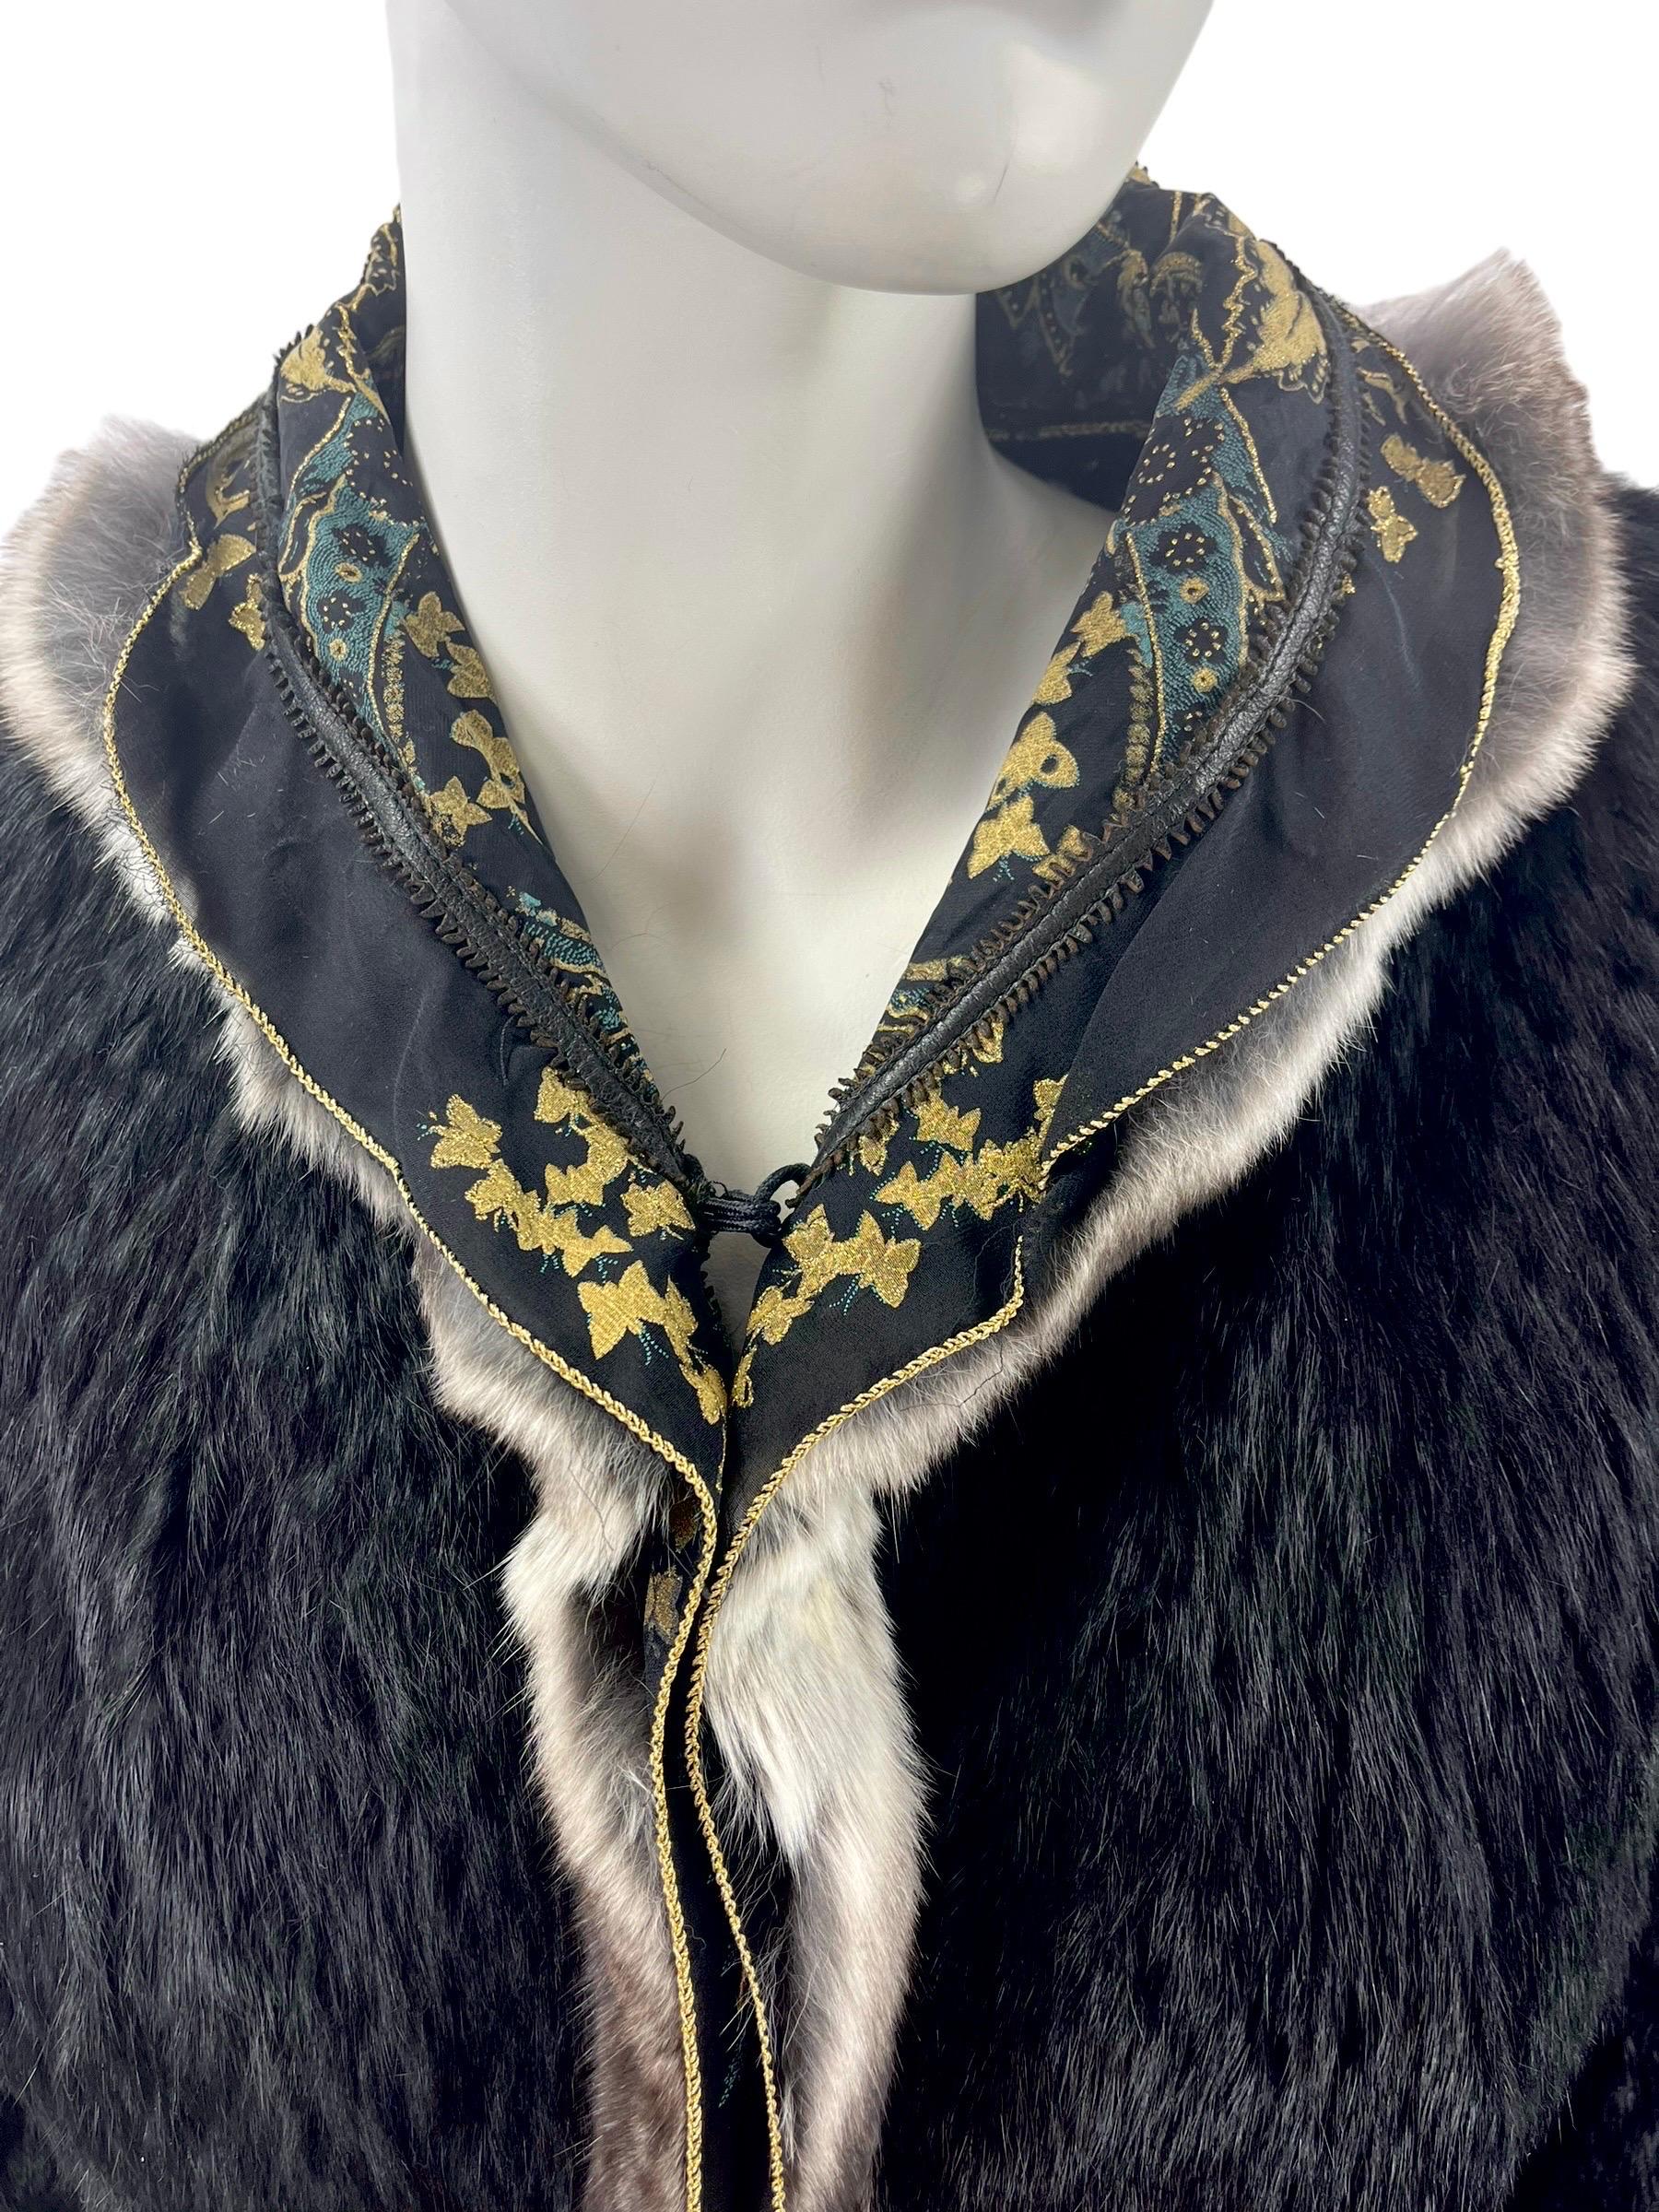 Vintage Roberto Cavalli Black Lapin Fur and Silk Corset Jacket

Amazing creation from 2004 Collection. 
Constructed from laser cut black lapin fur and gold brocade silk.
Corset lace-up fastening at the back
Finished with chinchilla trim.
Made in